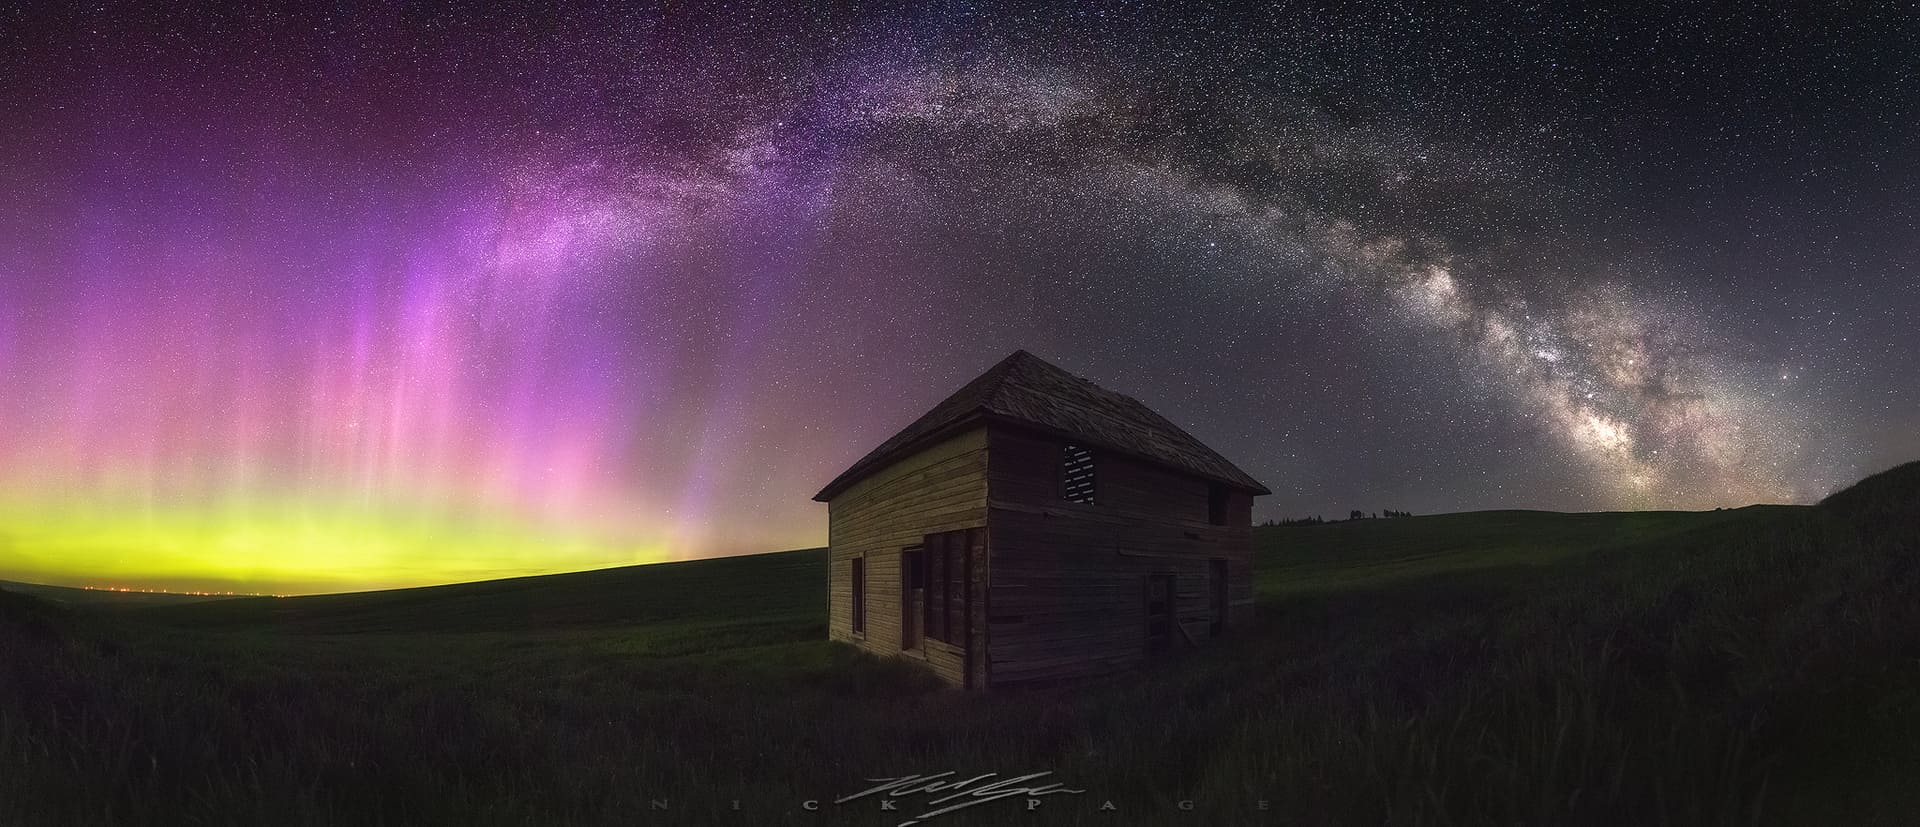 Best Aurora images In the USA